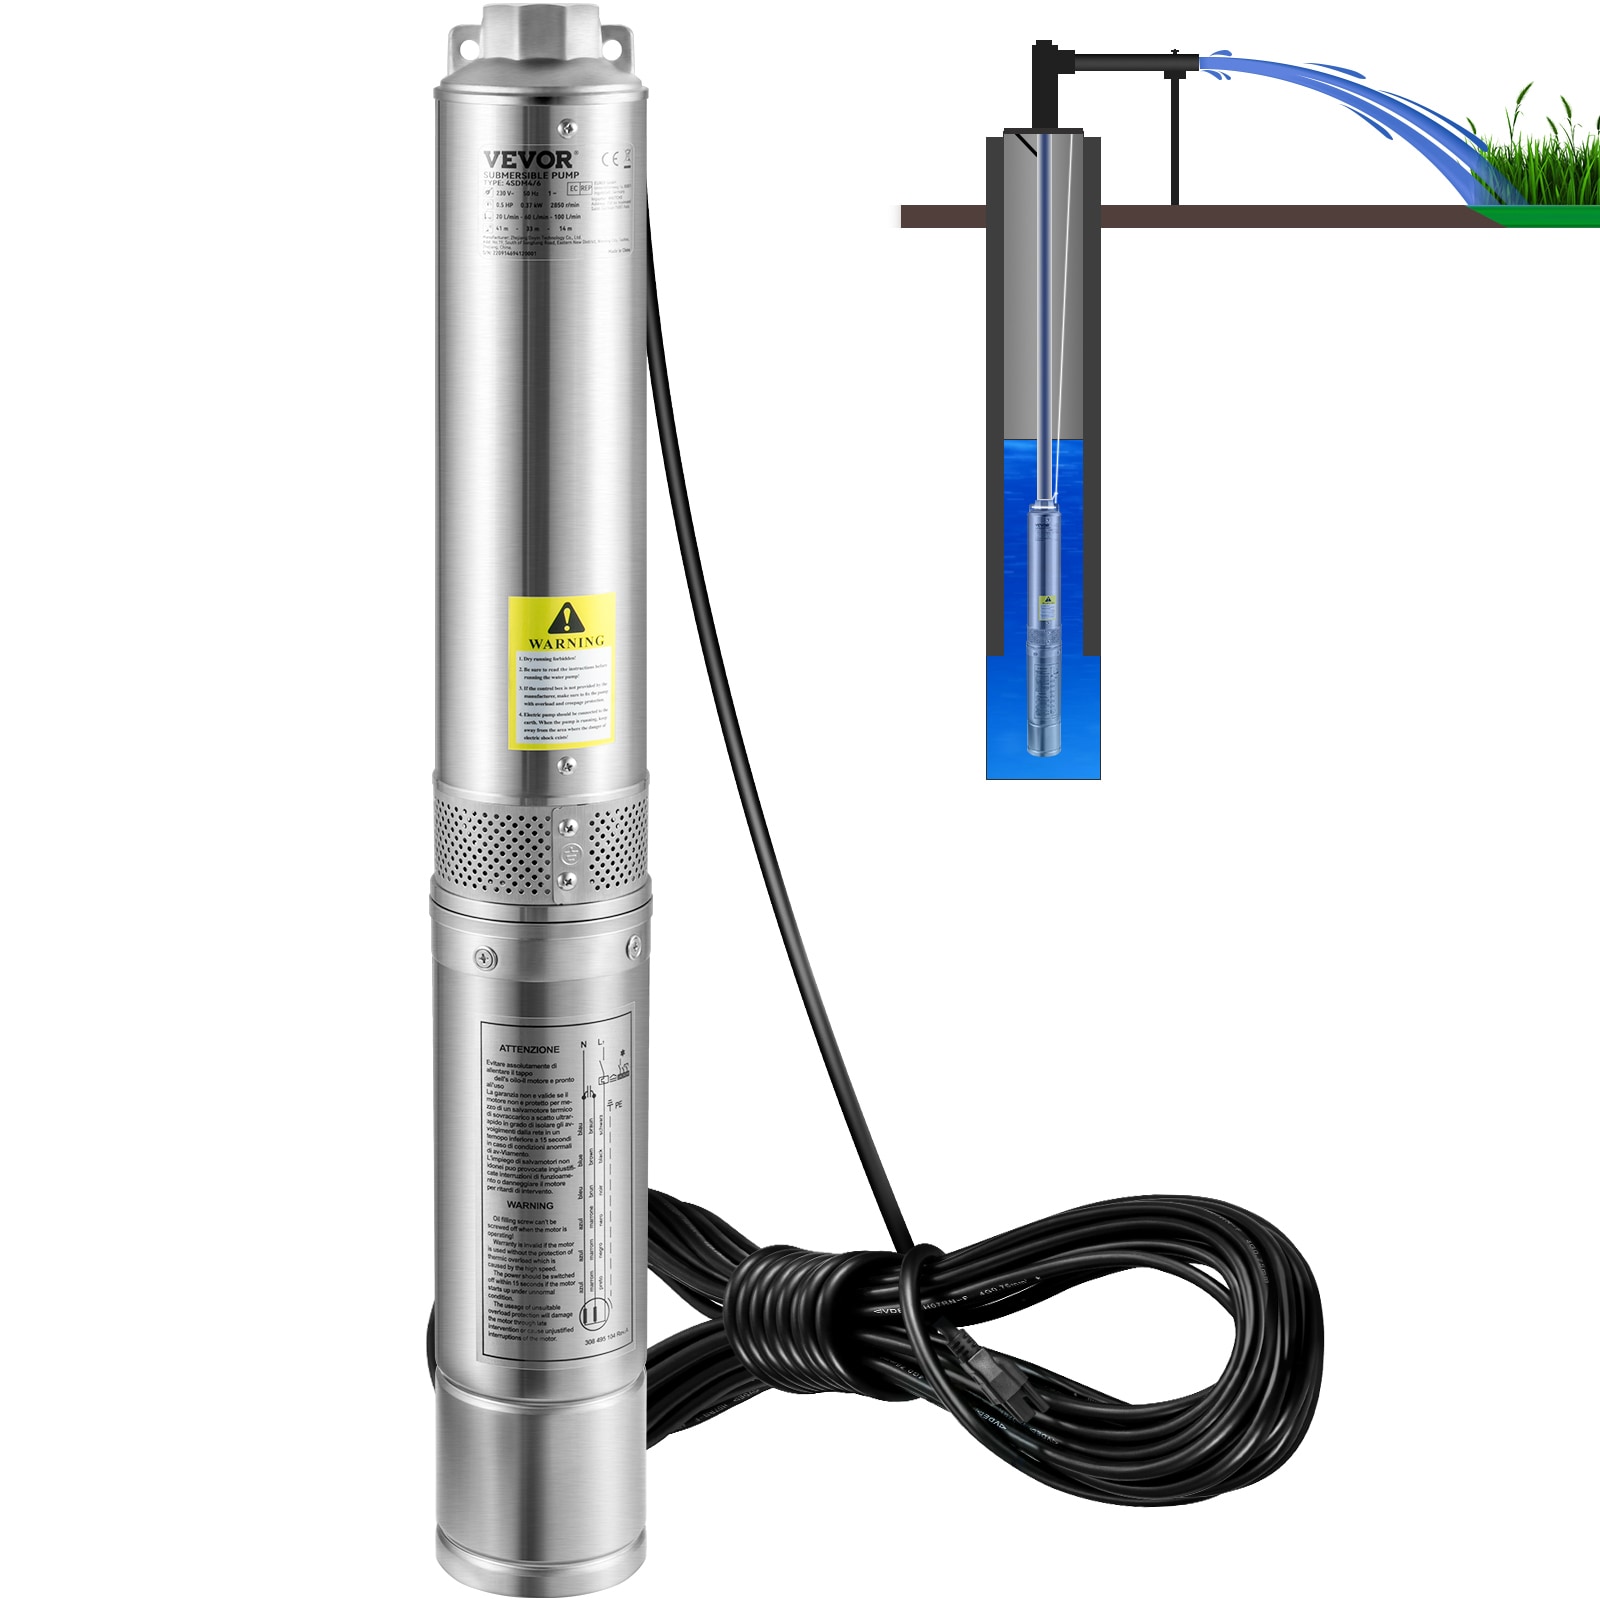 Submersible well pump Water Pumps & Tanks at